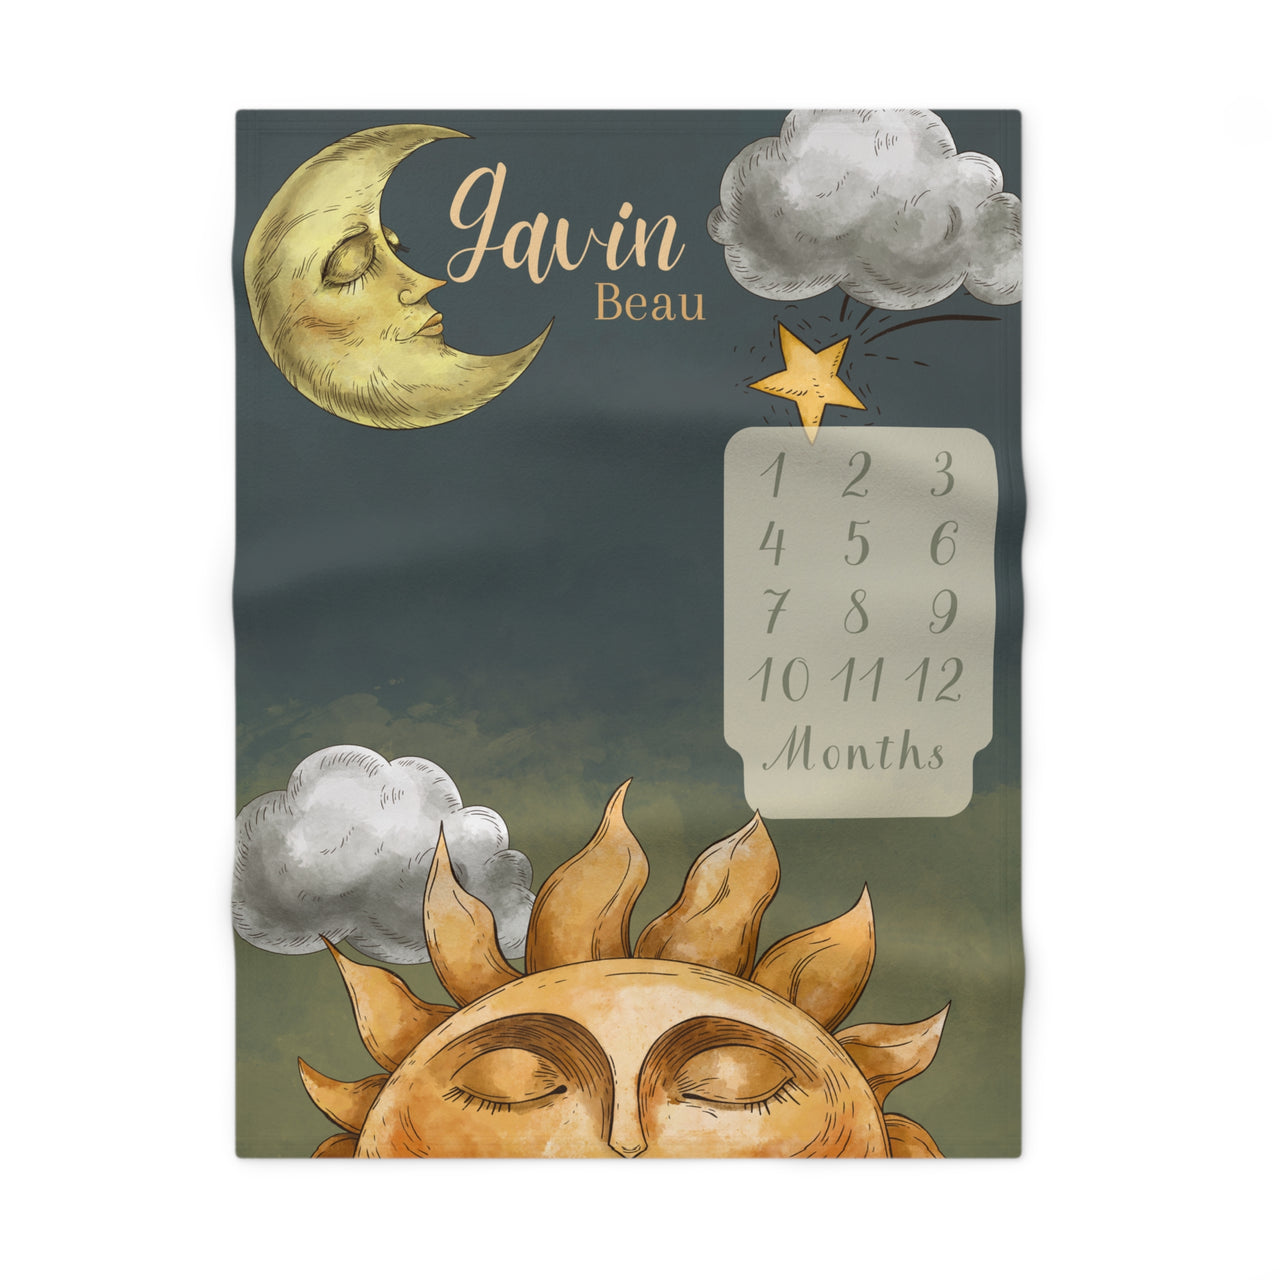 Sun and Moon Themed Soft Fleece Milestone Blanket, Boys Monthly Growth Tracker, Personalized Baby Blanket, Baby Shower Gift